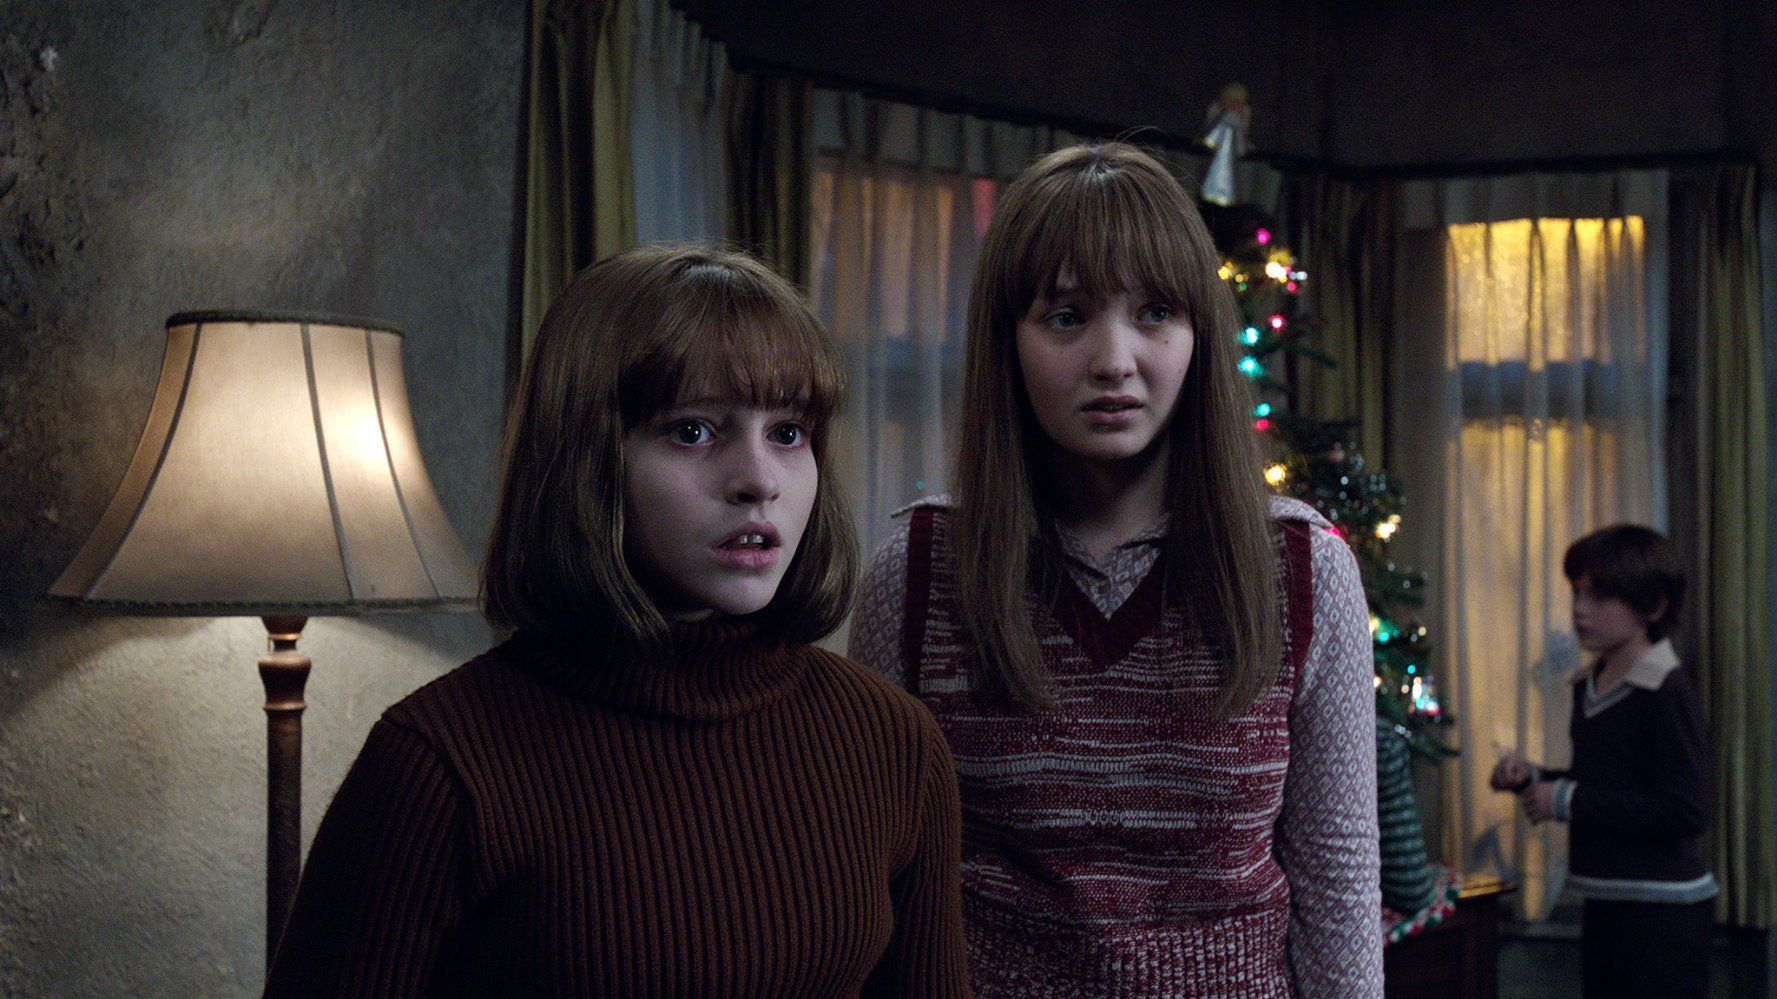 Madison Wolfe and Lauren Esposito in The Conjuring 2 (2016)